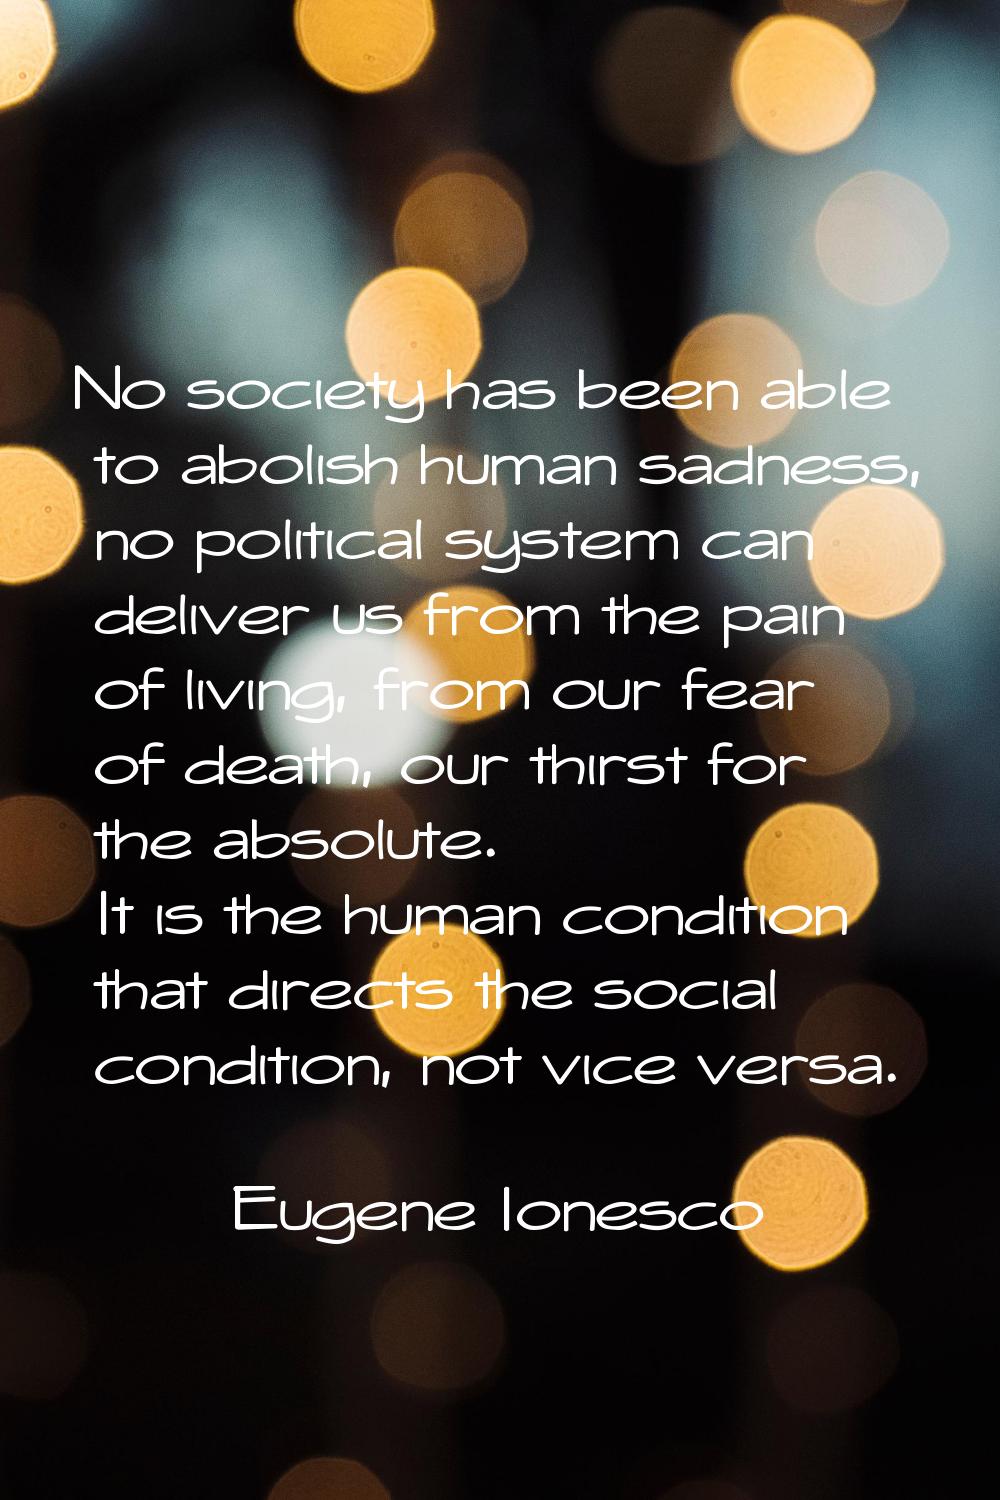 No society has been able to abolish human sadness, no political system can deliver us from the pain